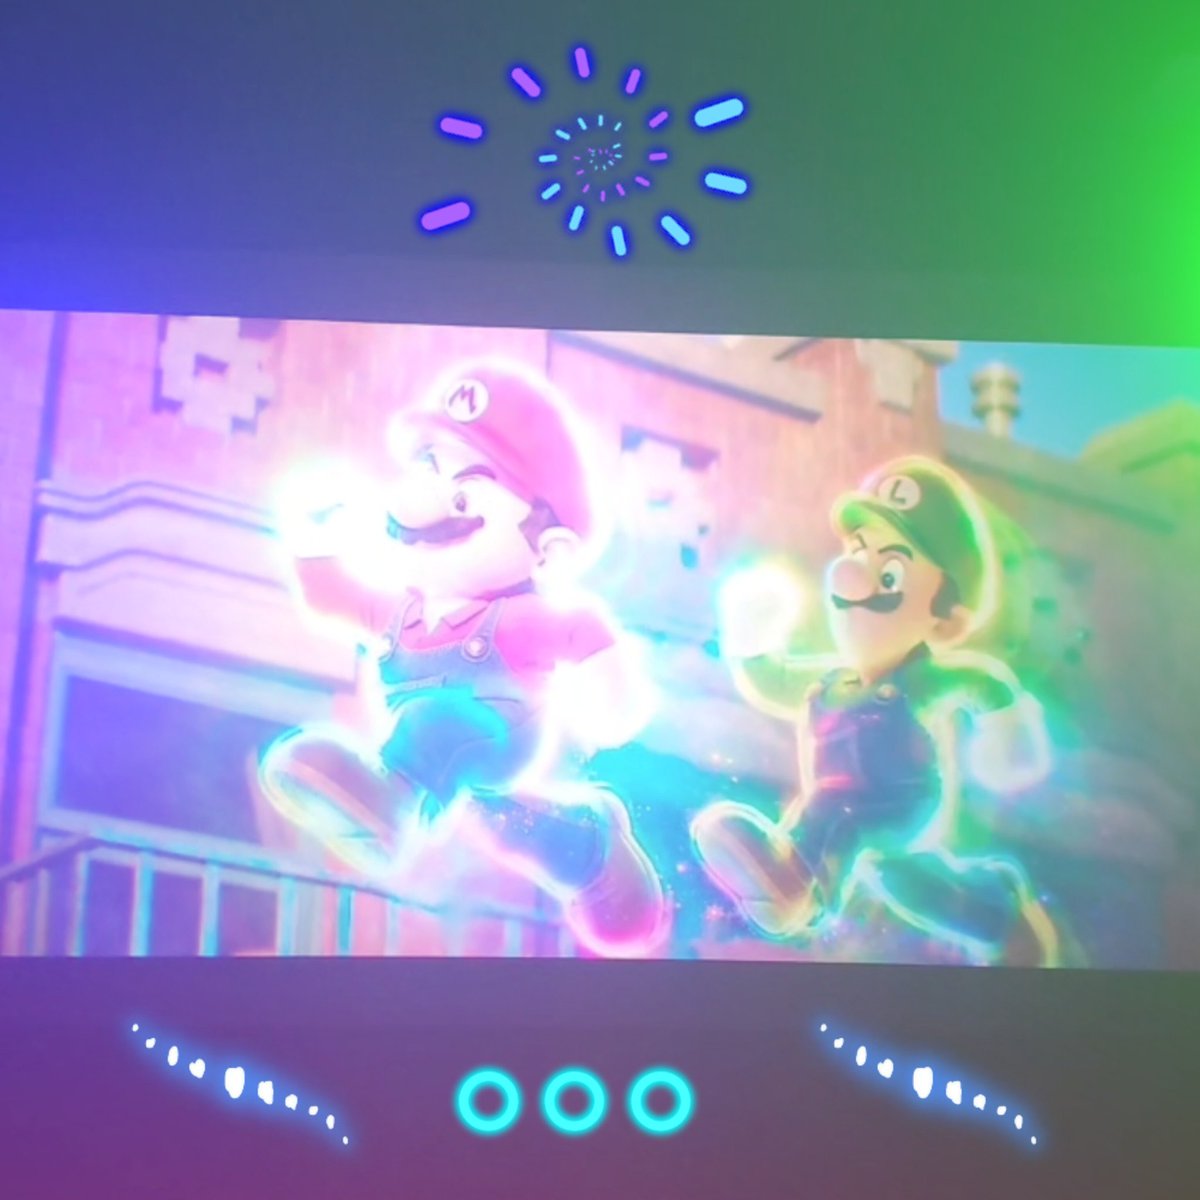 I finally made it 2 da #movietheater n #watched #SuperMarioBrosMovie 
It was soo #cool 2 watch on the #BigScreen it was #funny #action-packed #sweet 
#loved da #music n all da #eastereggs
#MustWatch #Nintendo #80sVideoGames